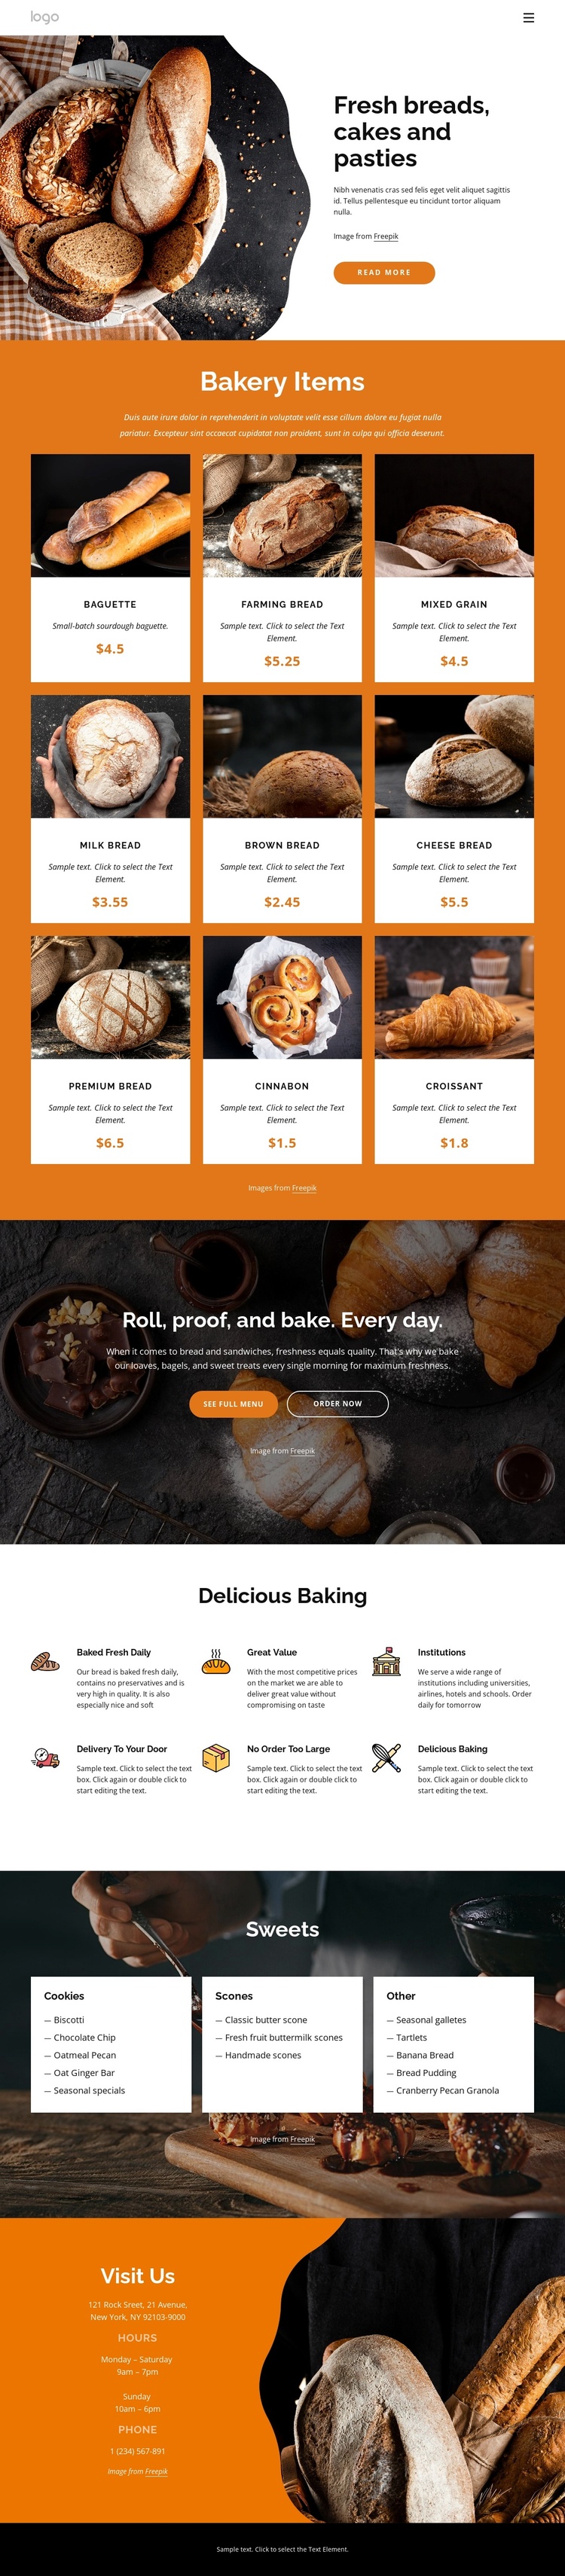 Fresh breads and cakes Joomla Template